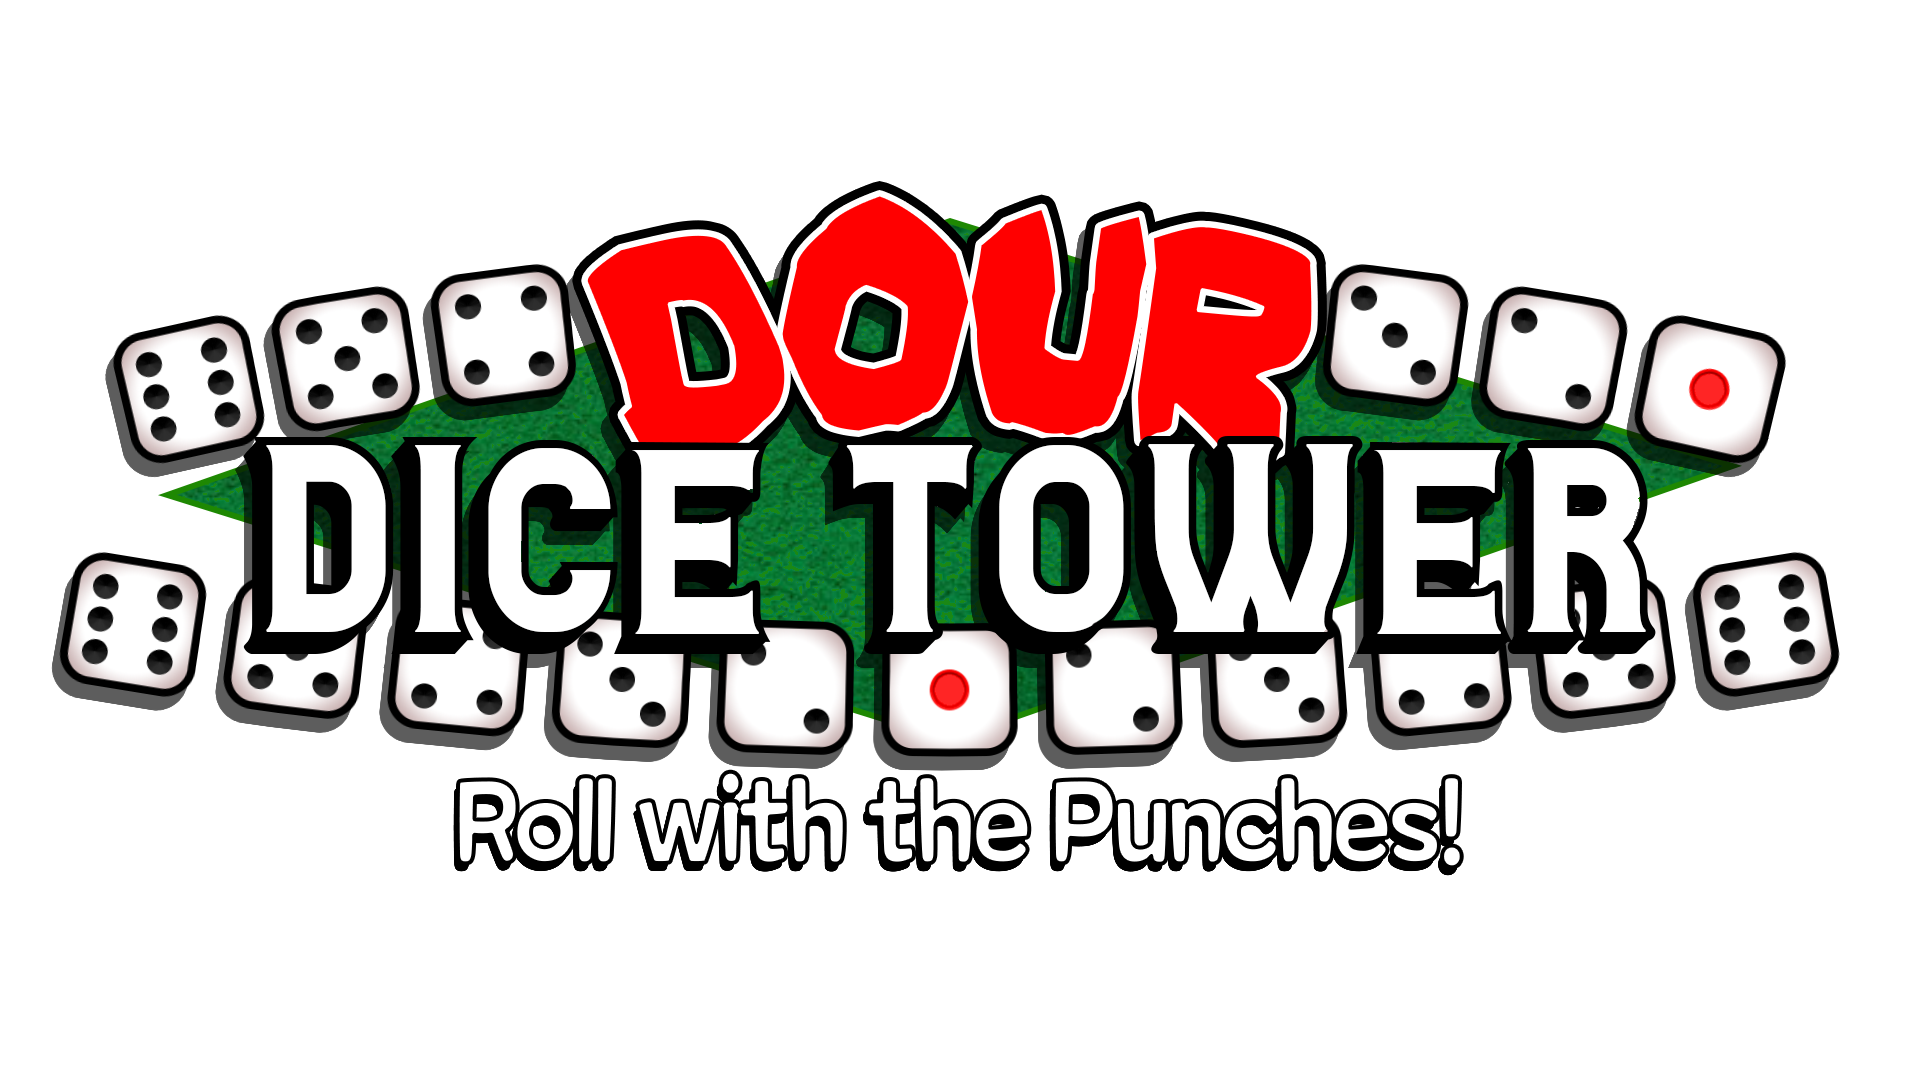 The Dour Dice Tower